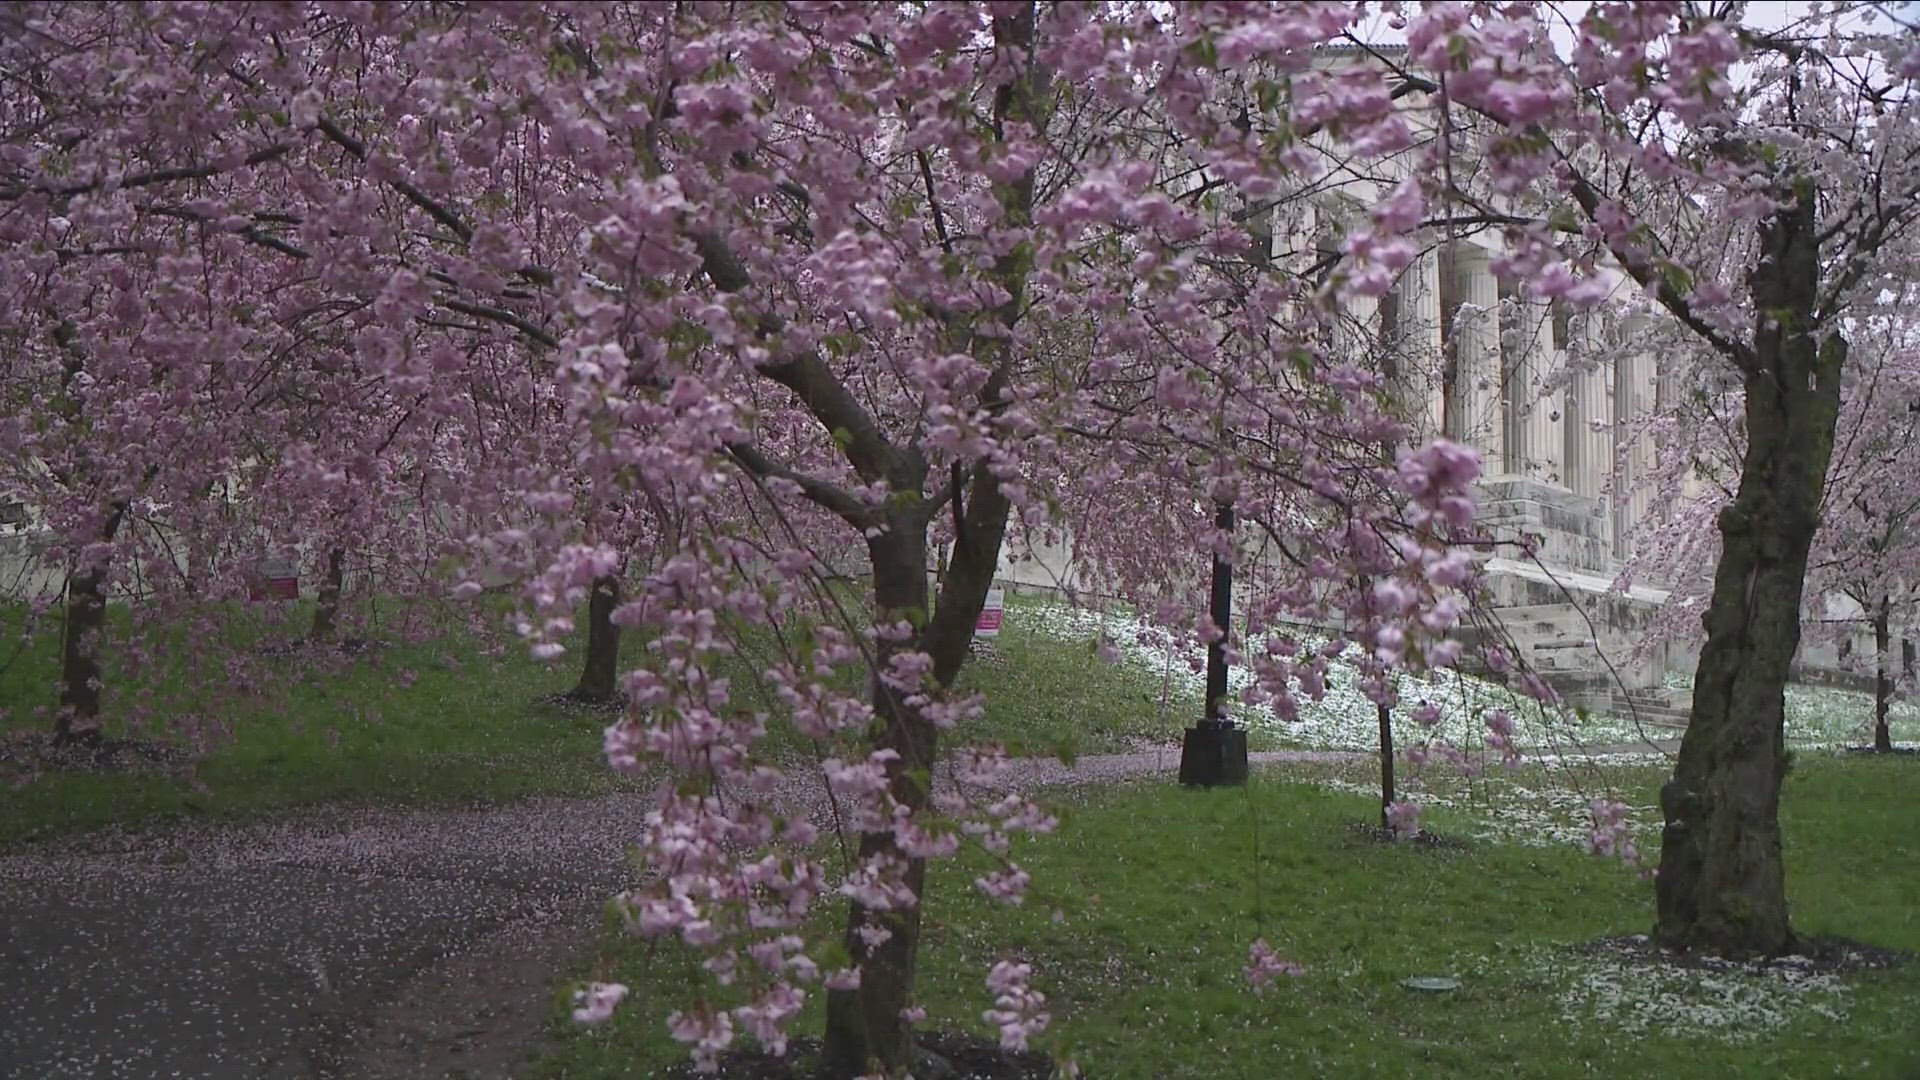 Cherry Blossom Festival to be held April 29-30 at Delaware Park